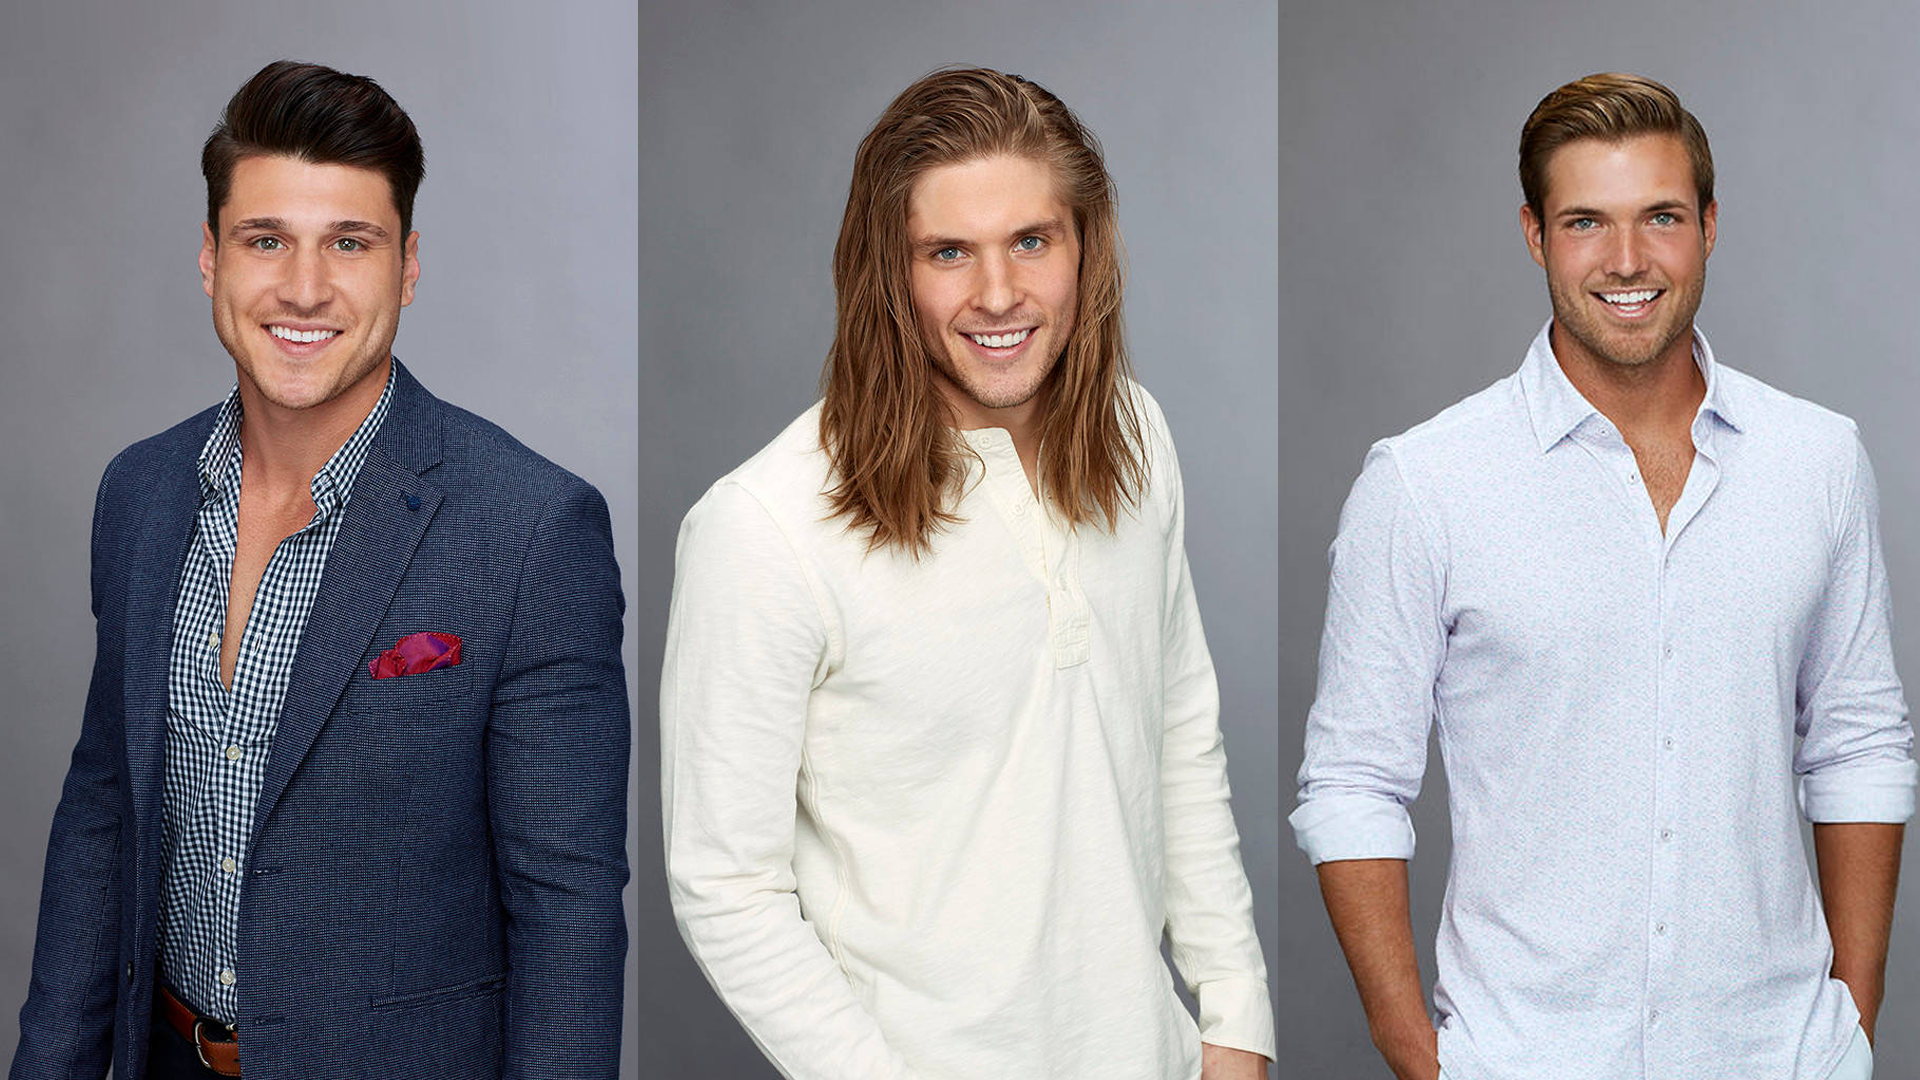 Predicting the new Bachelorette contestants' personalities based